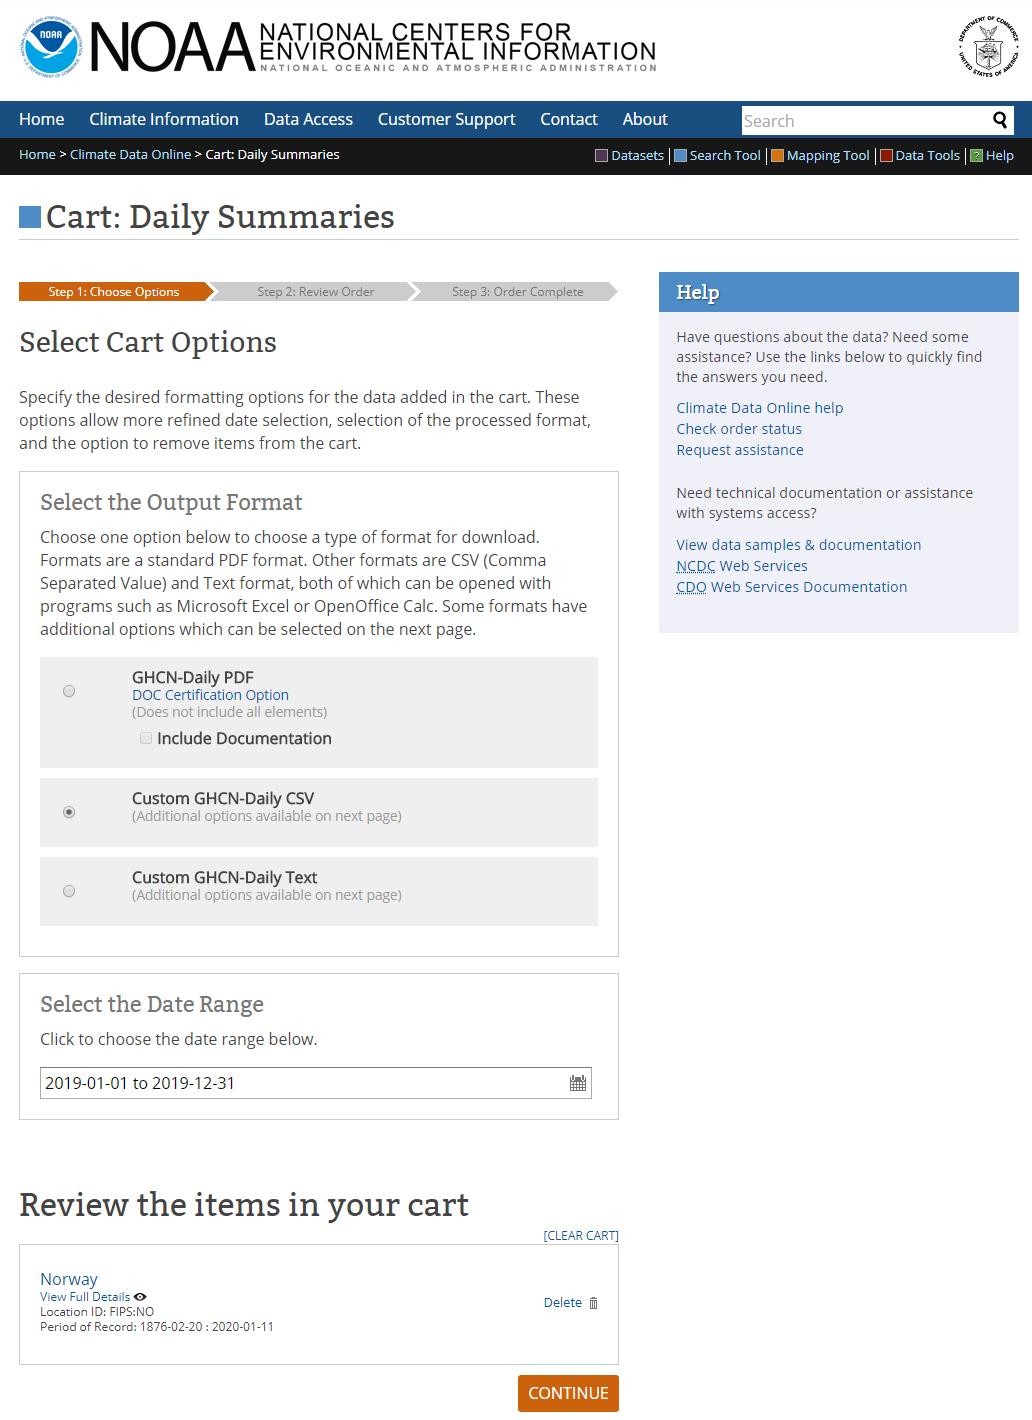 Screenshot of the Cart: Daily Summary page. On the left side, there is one Select Cart Option section, and there are two options available to choose, Select the Output Format and Select the Date Range. Below this, there is the section: Review the items in your cart.